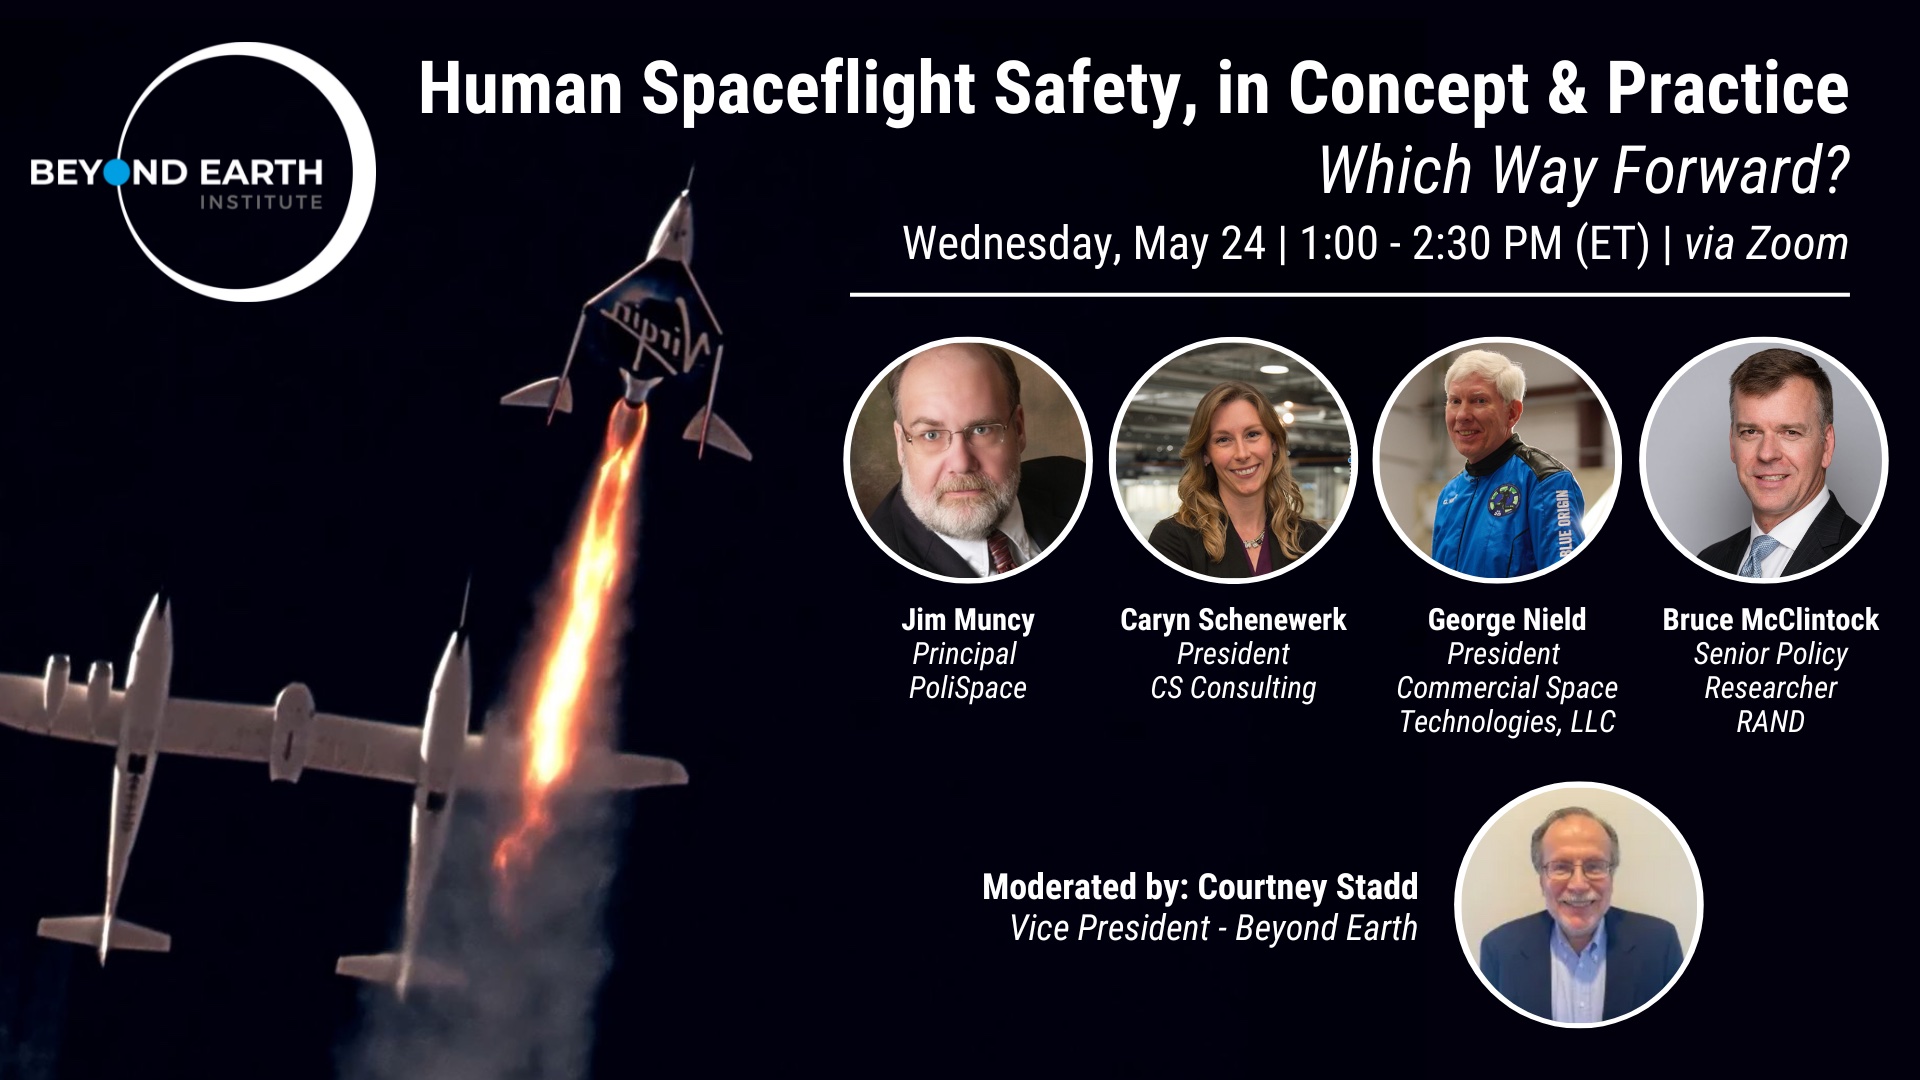 Webinar: Human Spaceflight Safety, in Concept & Practice: Which Way Forward?